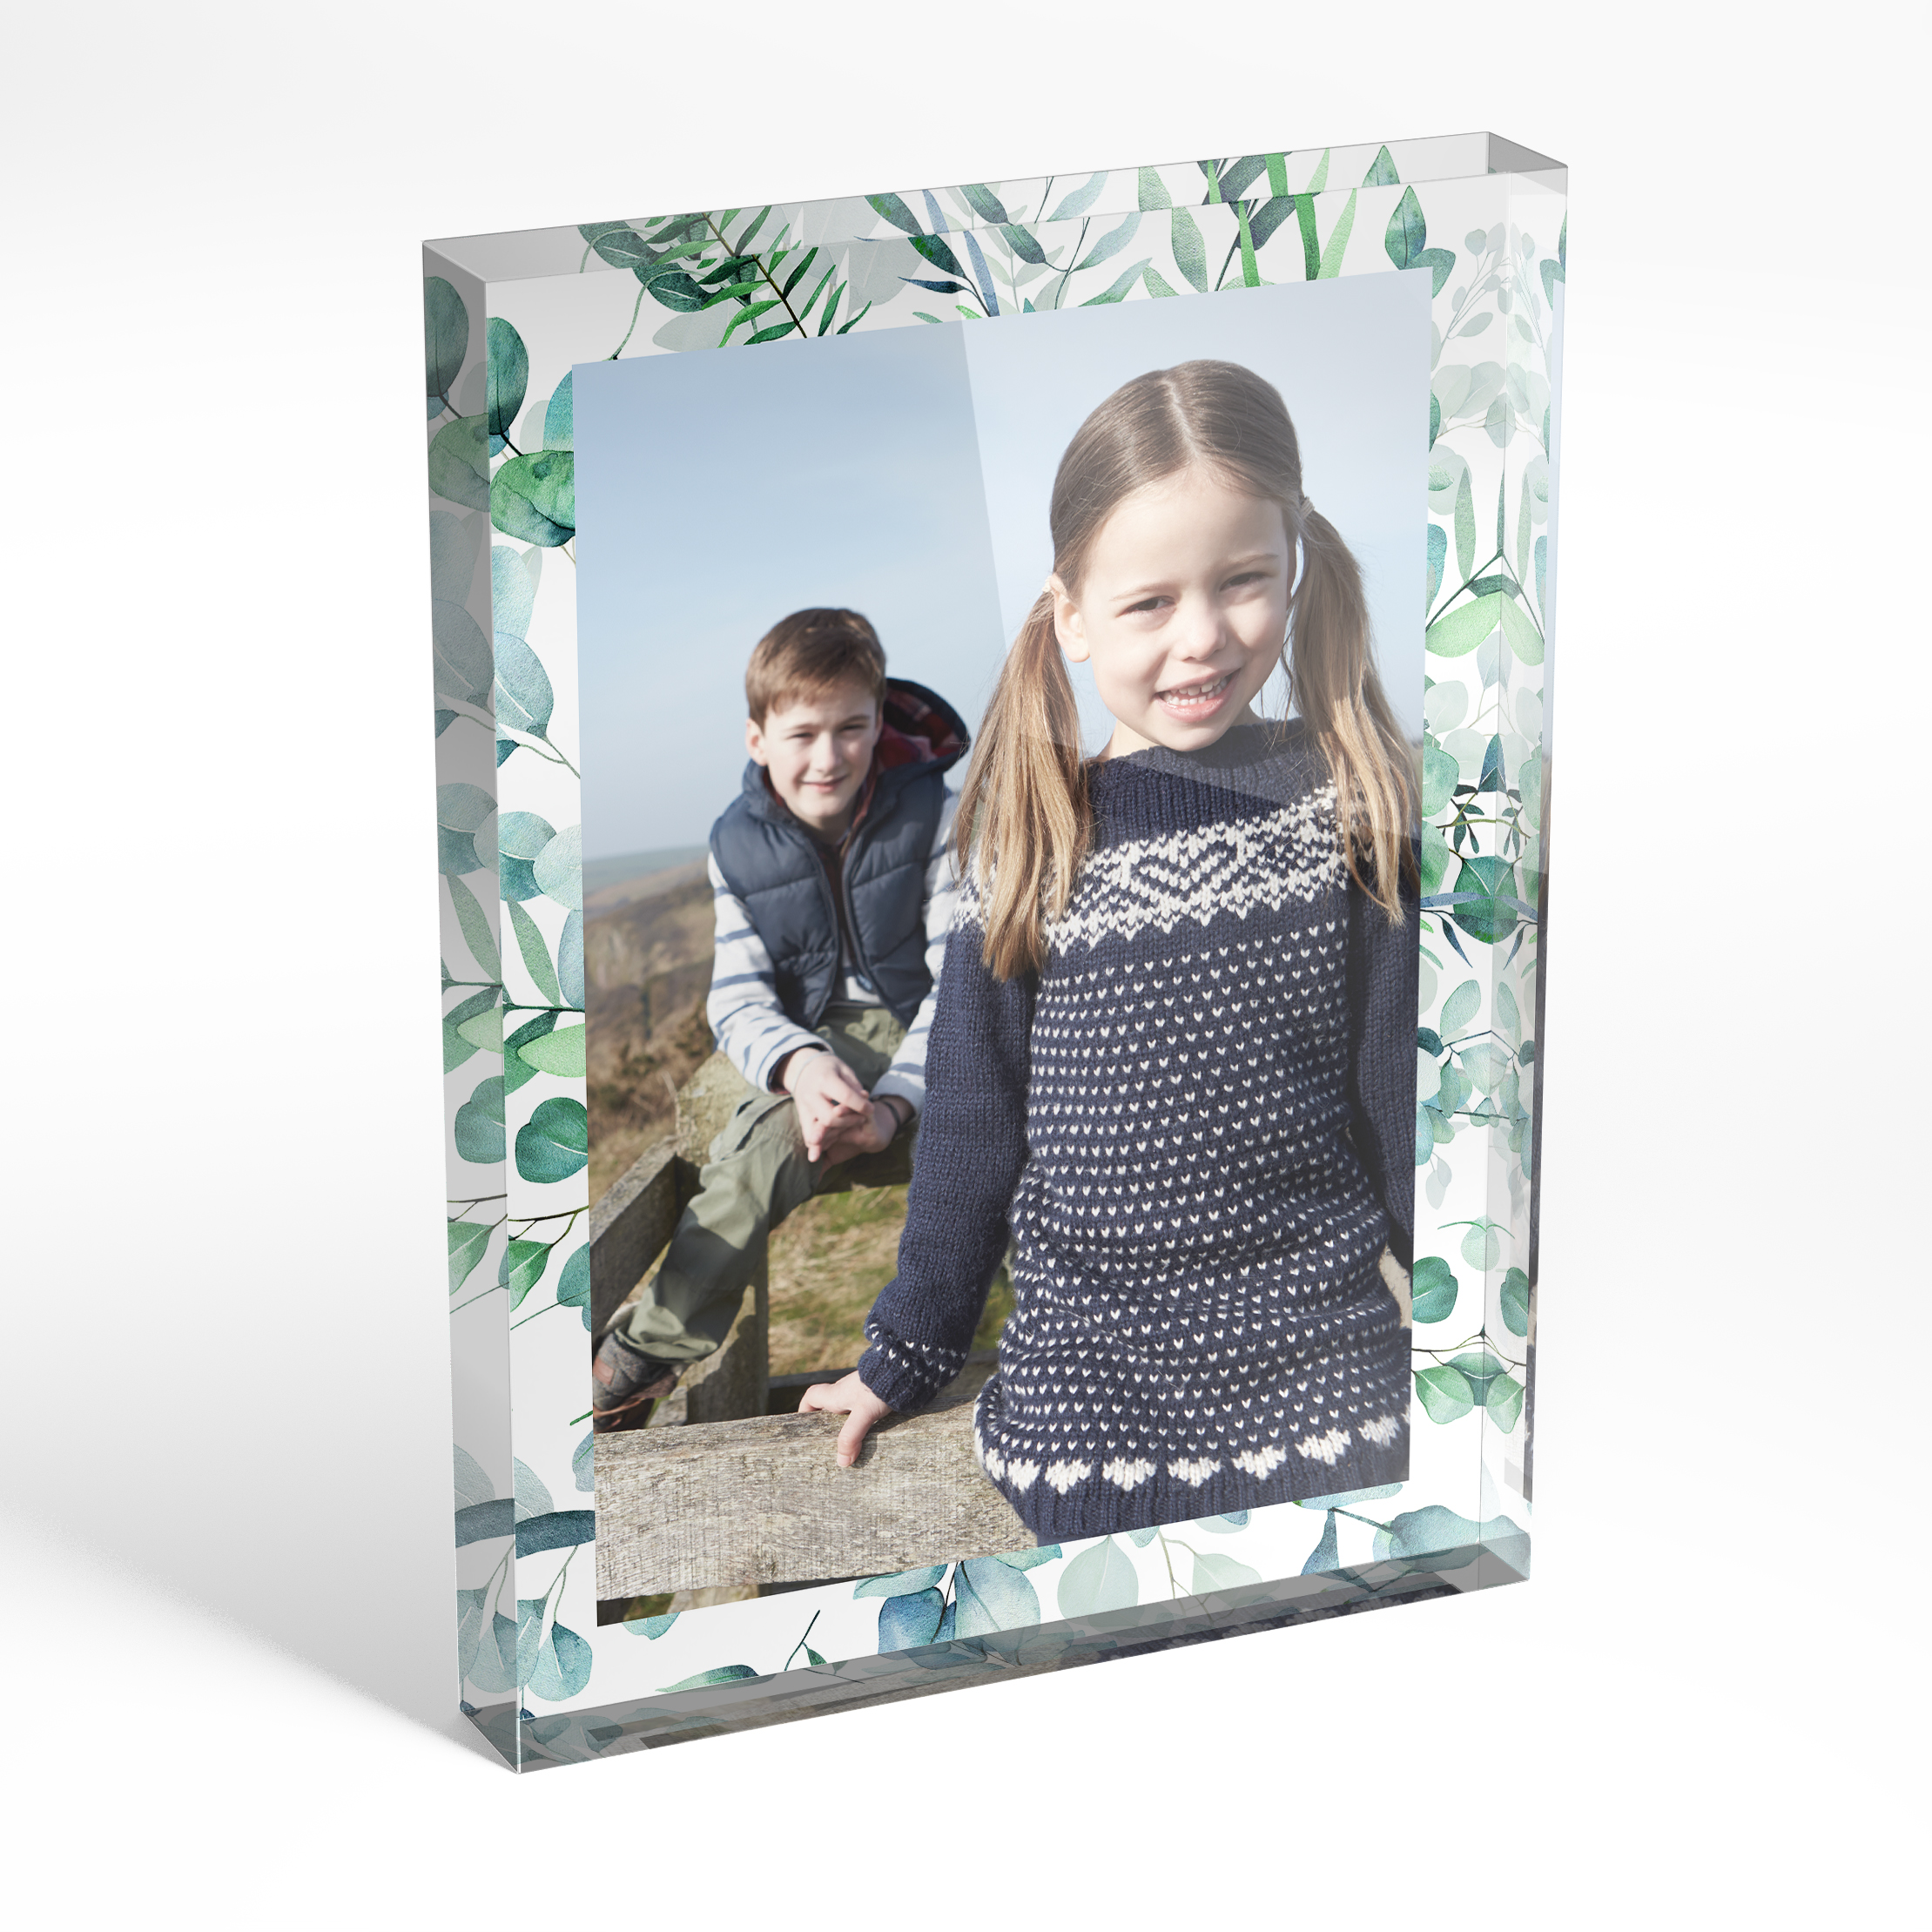 An angled side view of a portrait layout Acrylic Photo Block with space for 1 photo. Thiis design is named "Floral Photo Frame". 